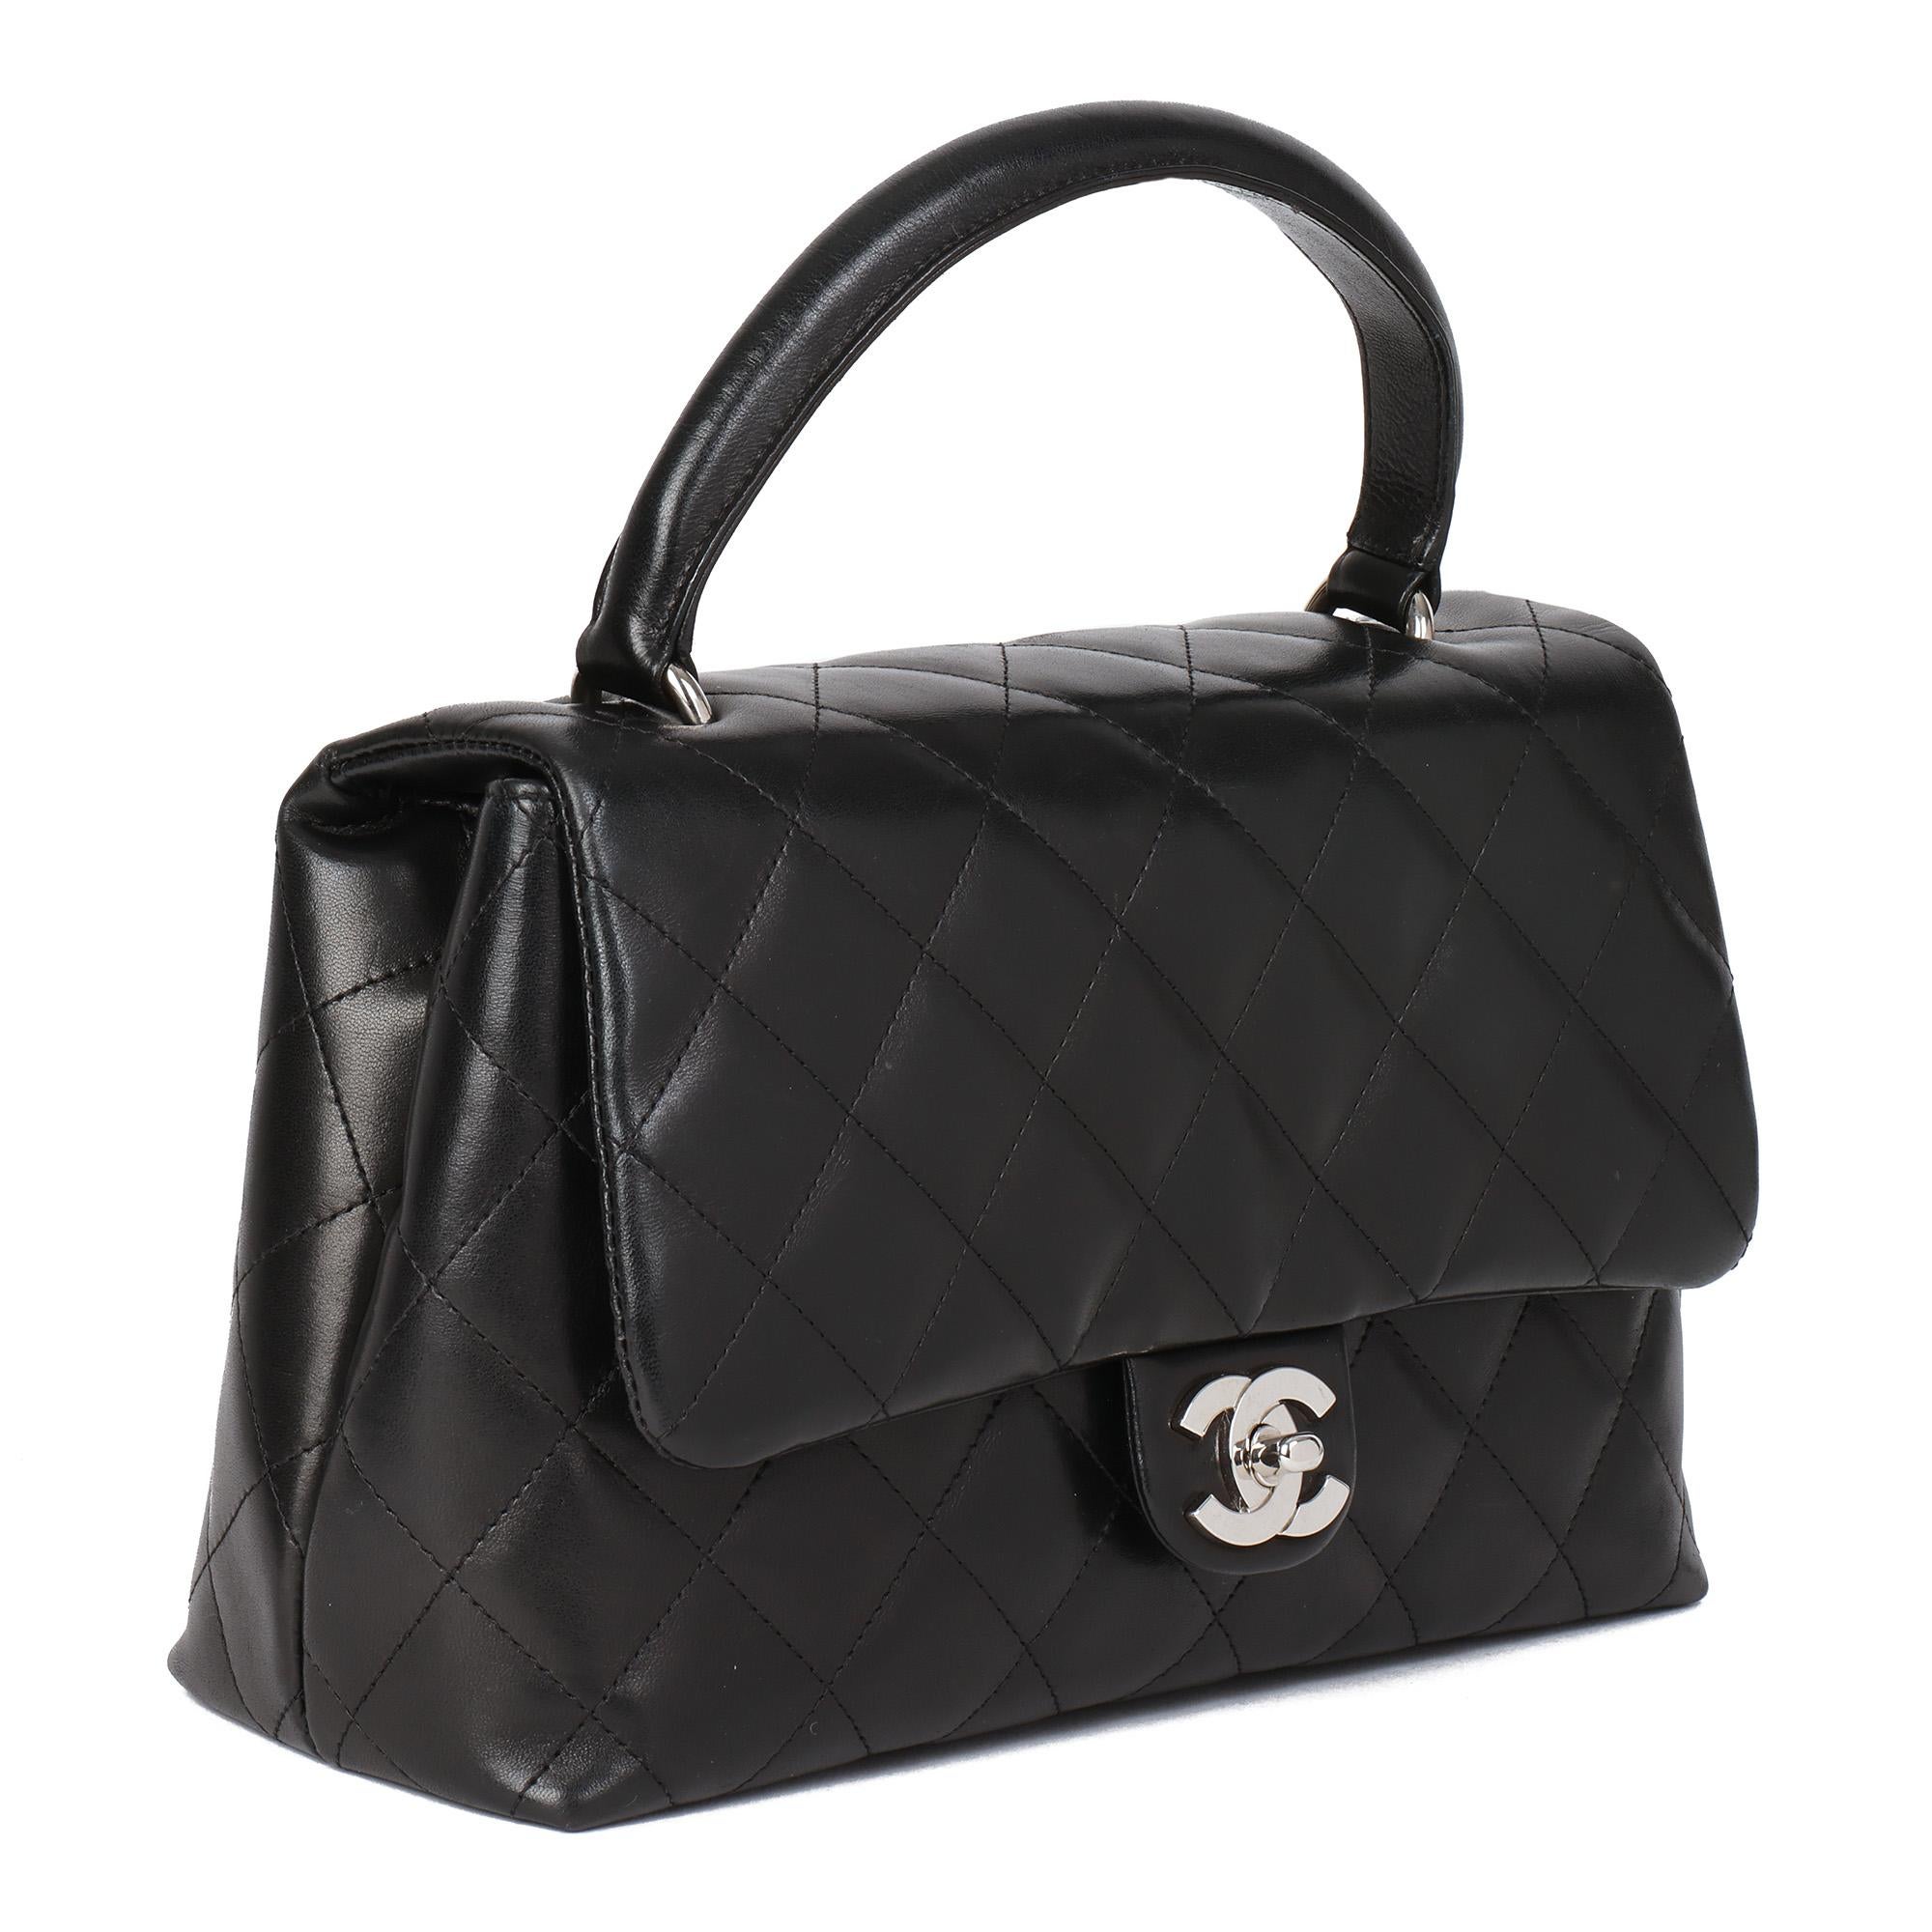 CHANEL
Black Quilted Lambskin Classic Kelly

Xupes Reference: HB4544
Serial Number: 11207116
Age (Circa): 2006
Accompanied By: Chanel Dust Bag, Authenticity Card, Care Booklet
Authenticity Details: Authenticity Card, Serial Sticker (Made in